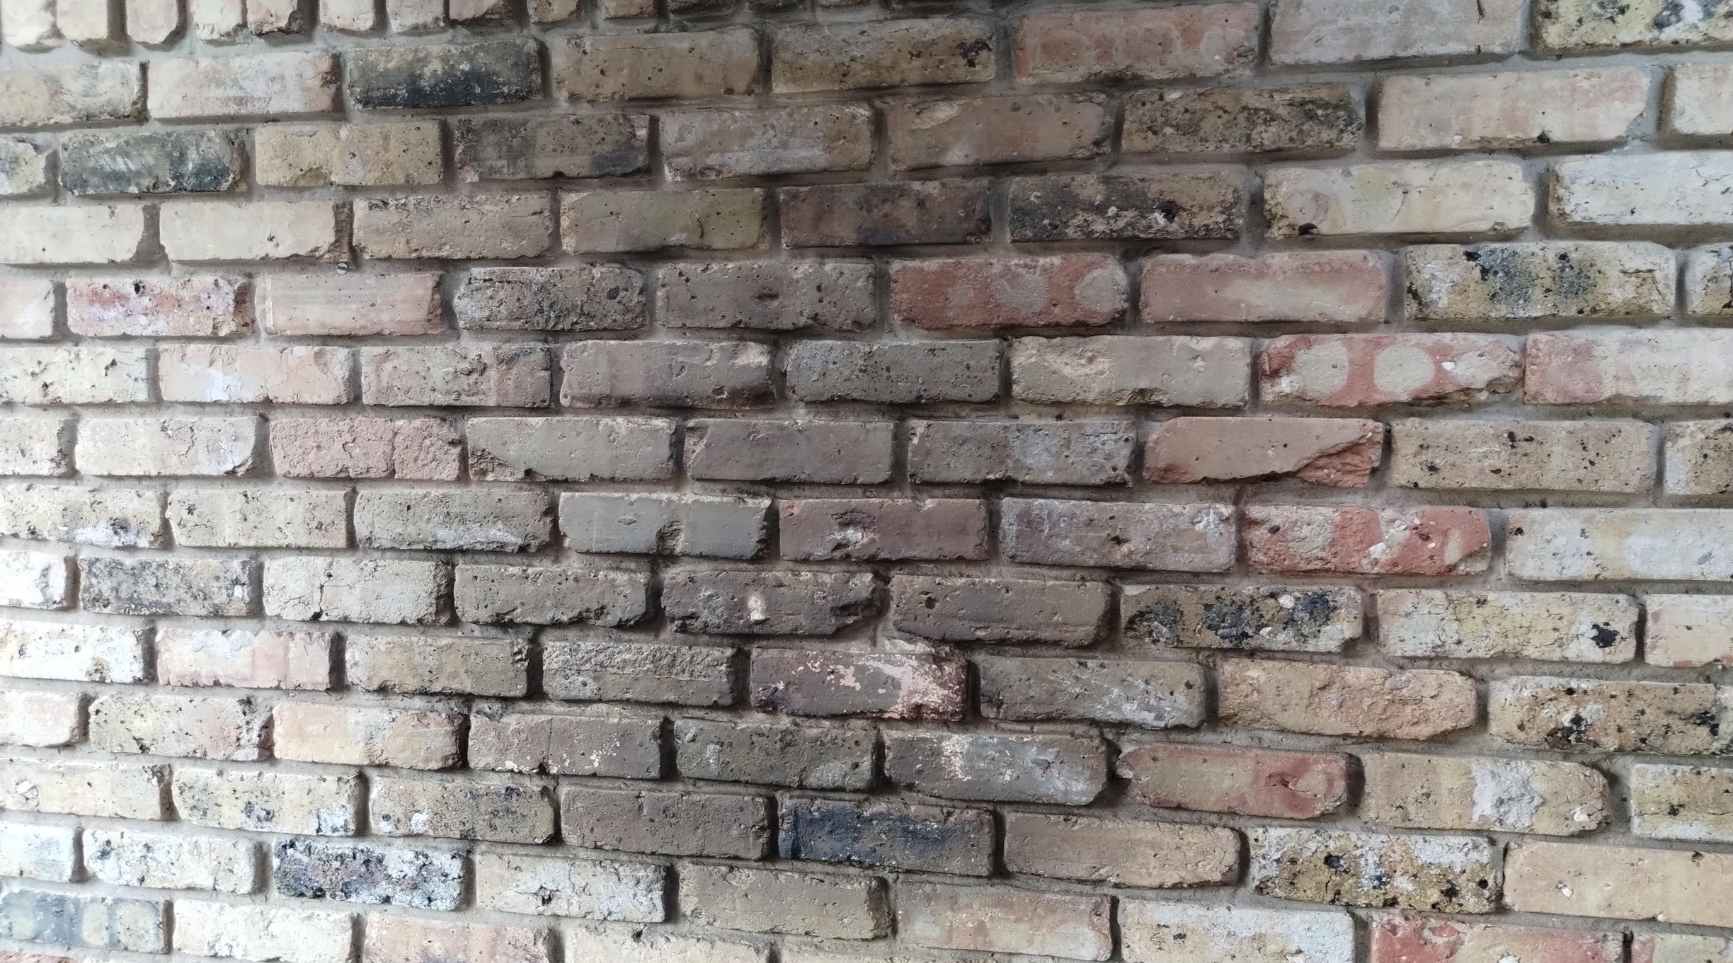 How To Get Grease Off Brick